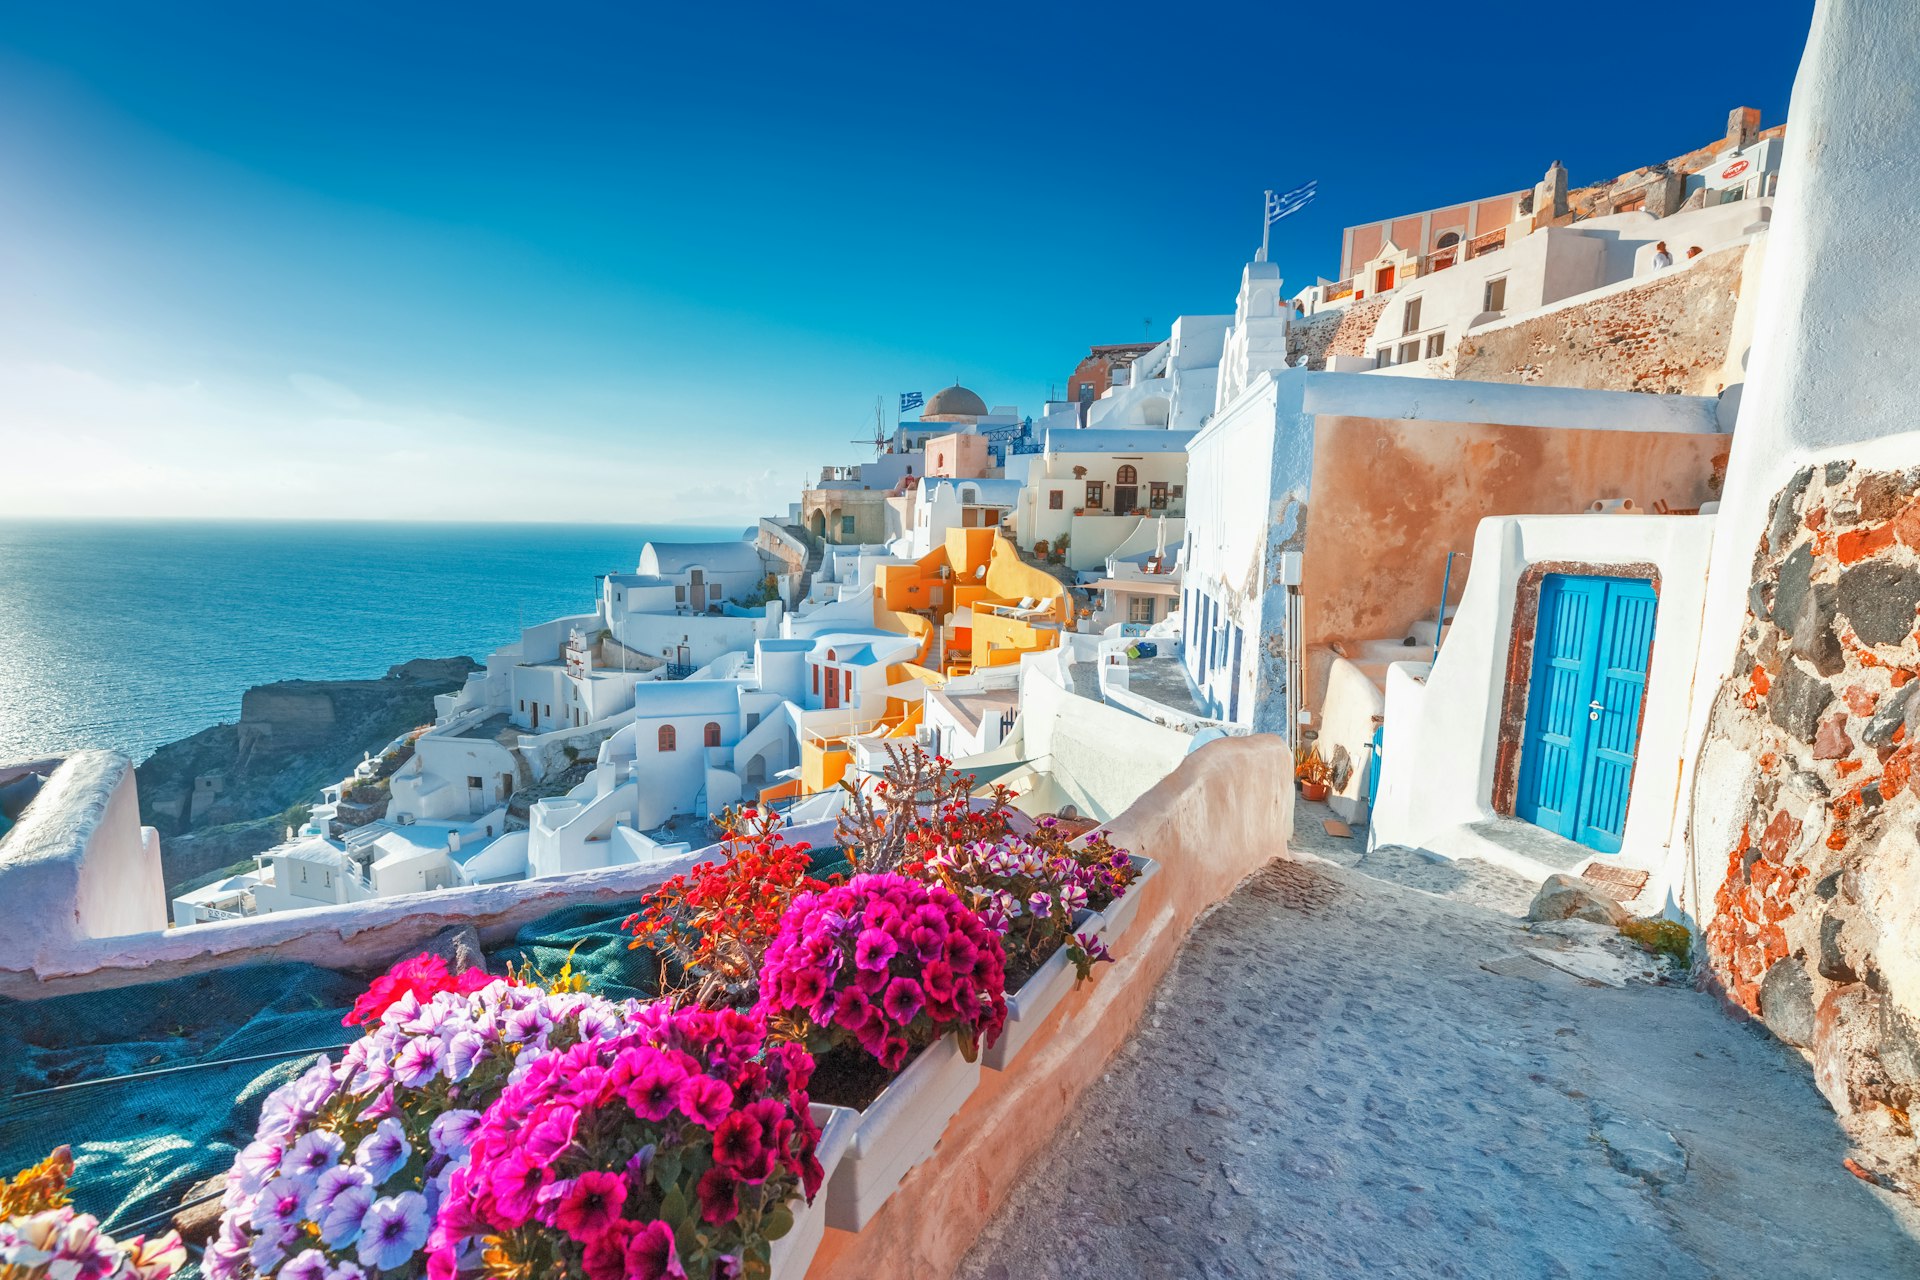 Picturesque view of traditional Cycladic Santorini houses on small street with flowers in foreground in Oia village